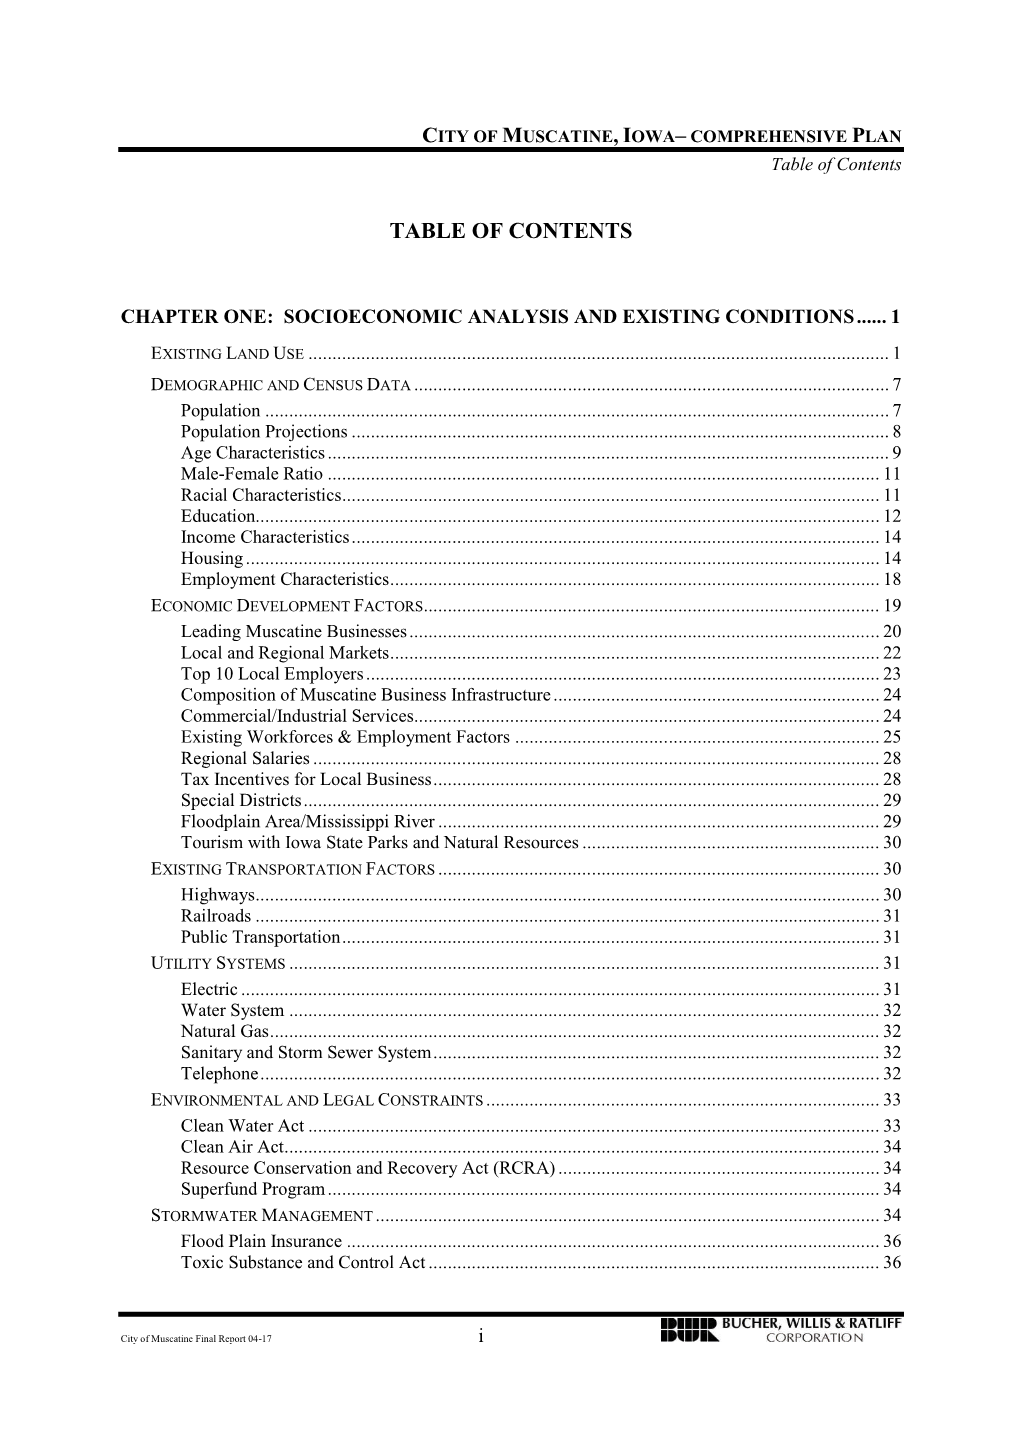 COMPREHENSIVE PLAN Table of Contents